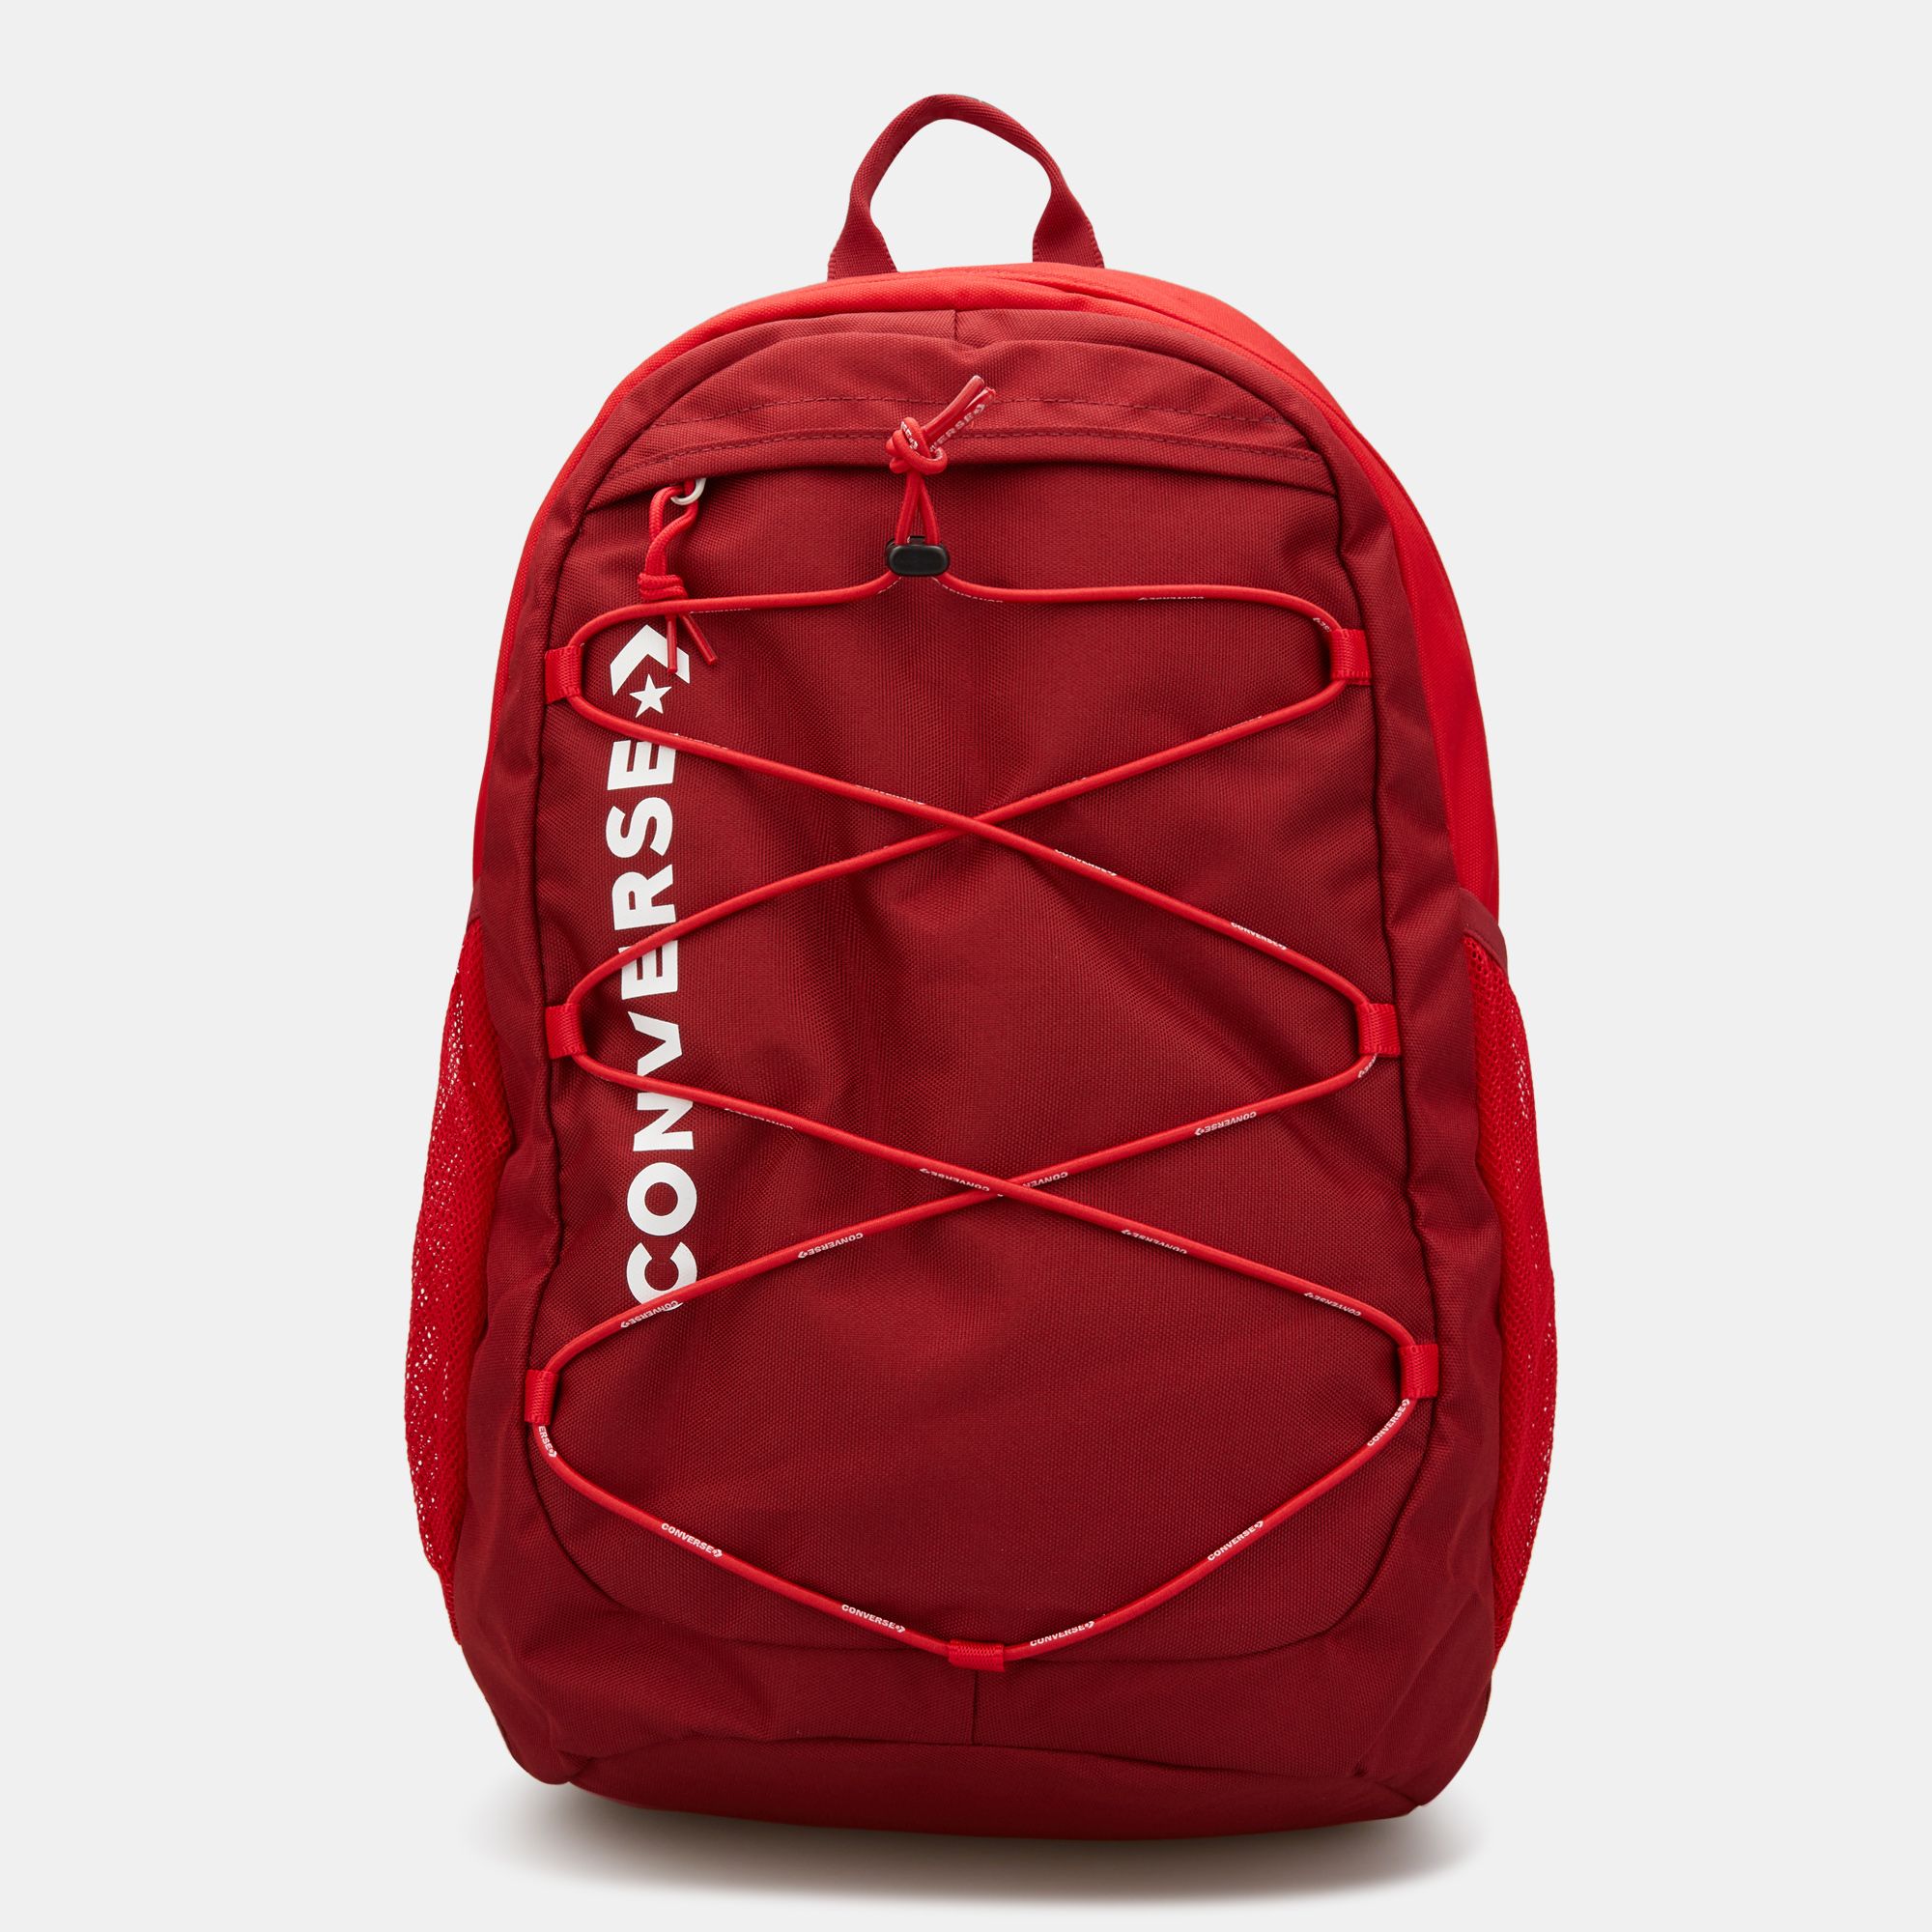 converse take out backpack